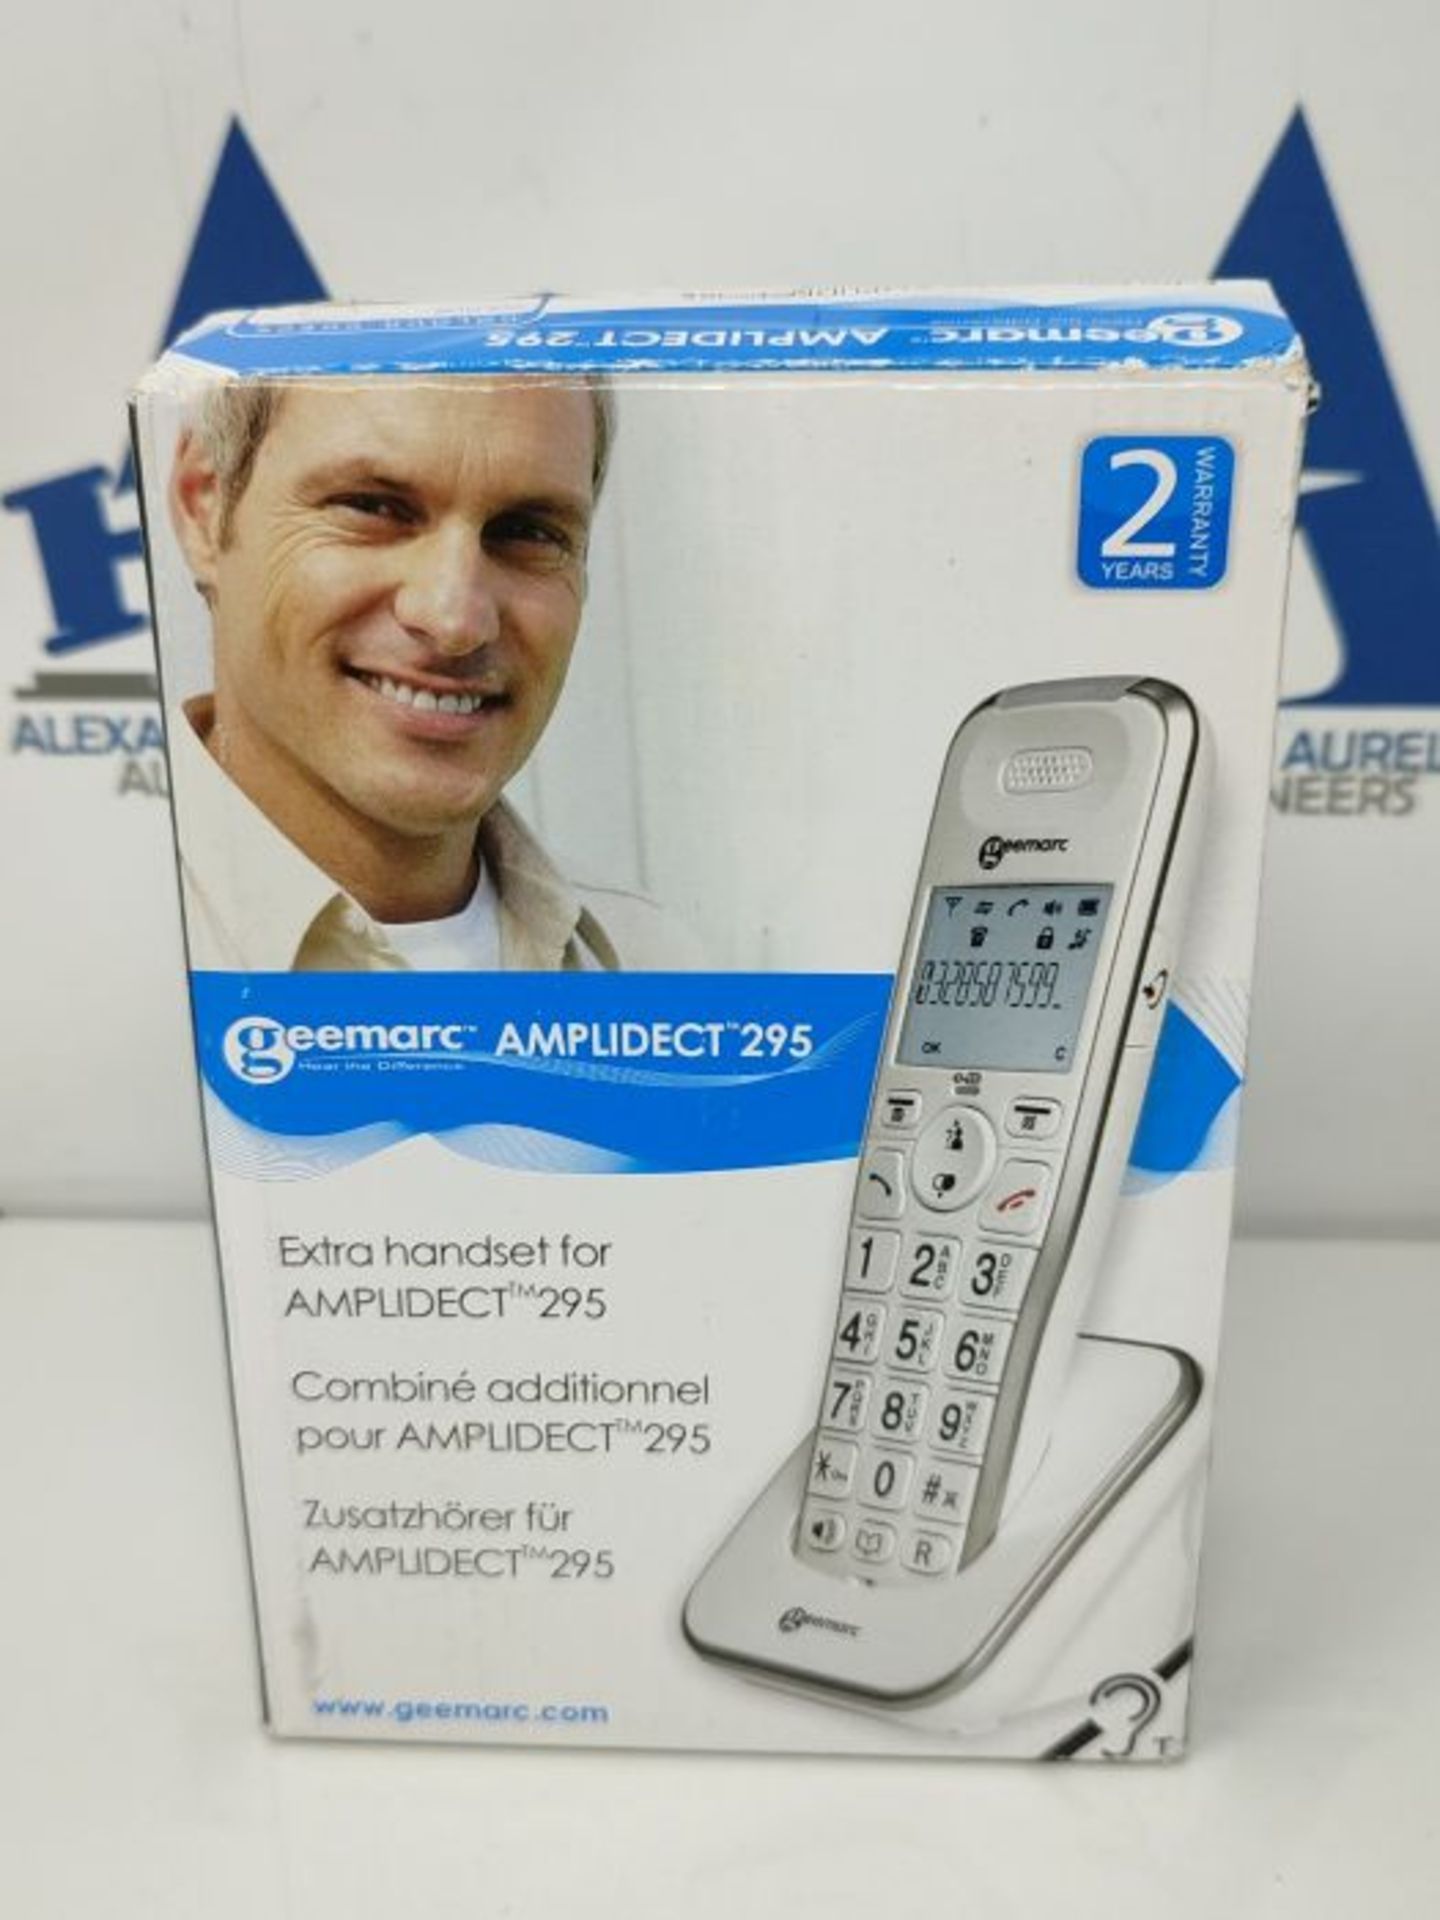 Geemarc Amplidect 295 HS - Additional Handset for Geemarc Amplidect 295 Range with Ext - Image 2 of 3